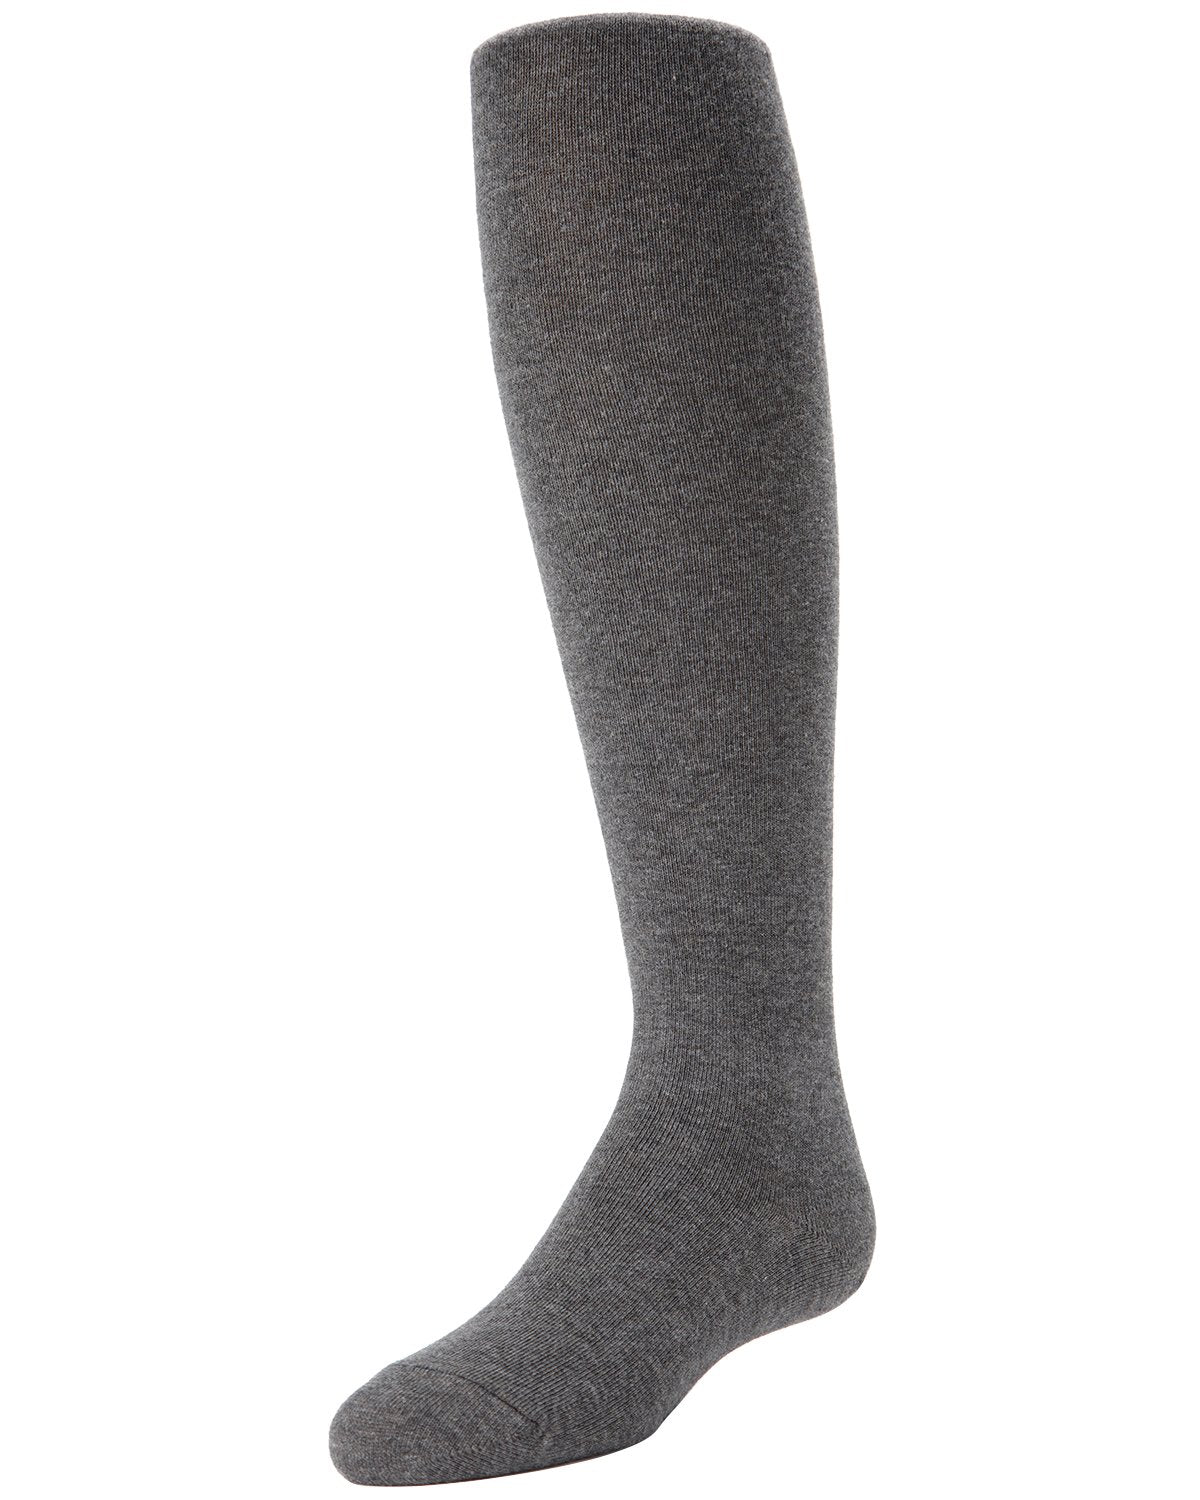 Girls Cotton Blend Opaque Sweater Tights